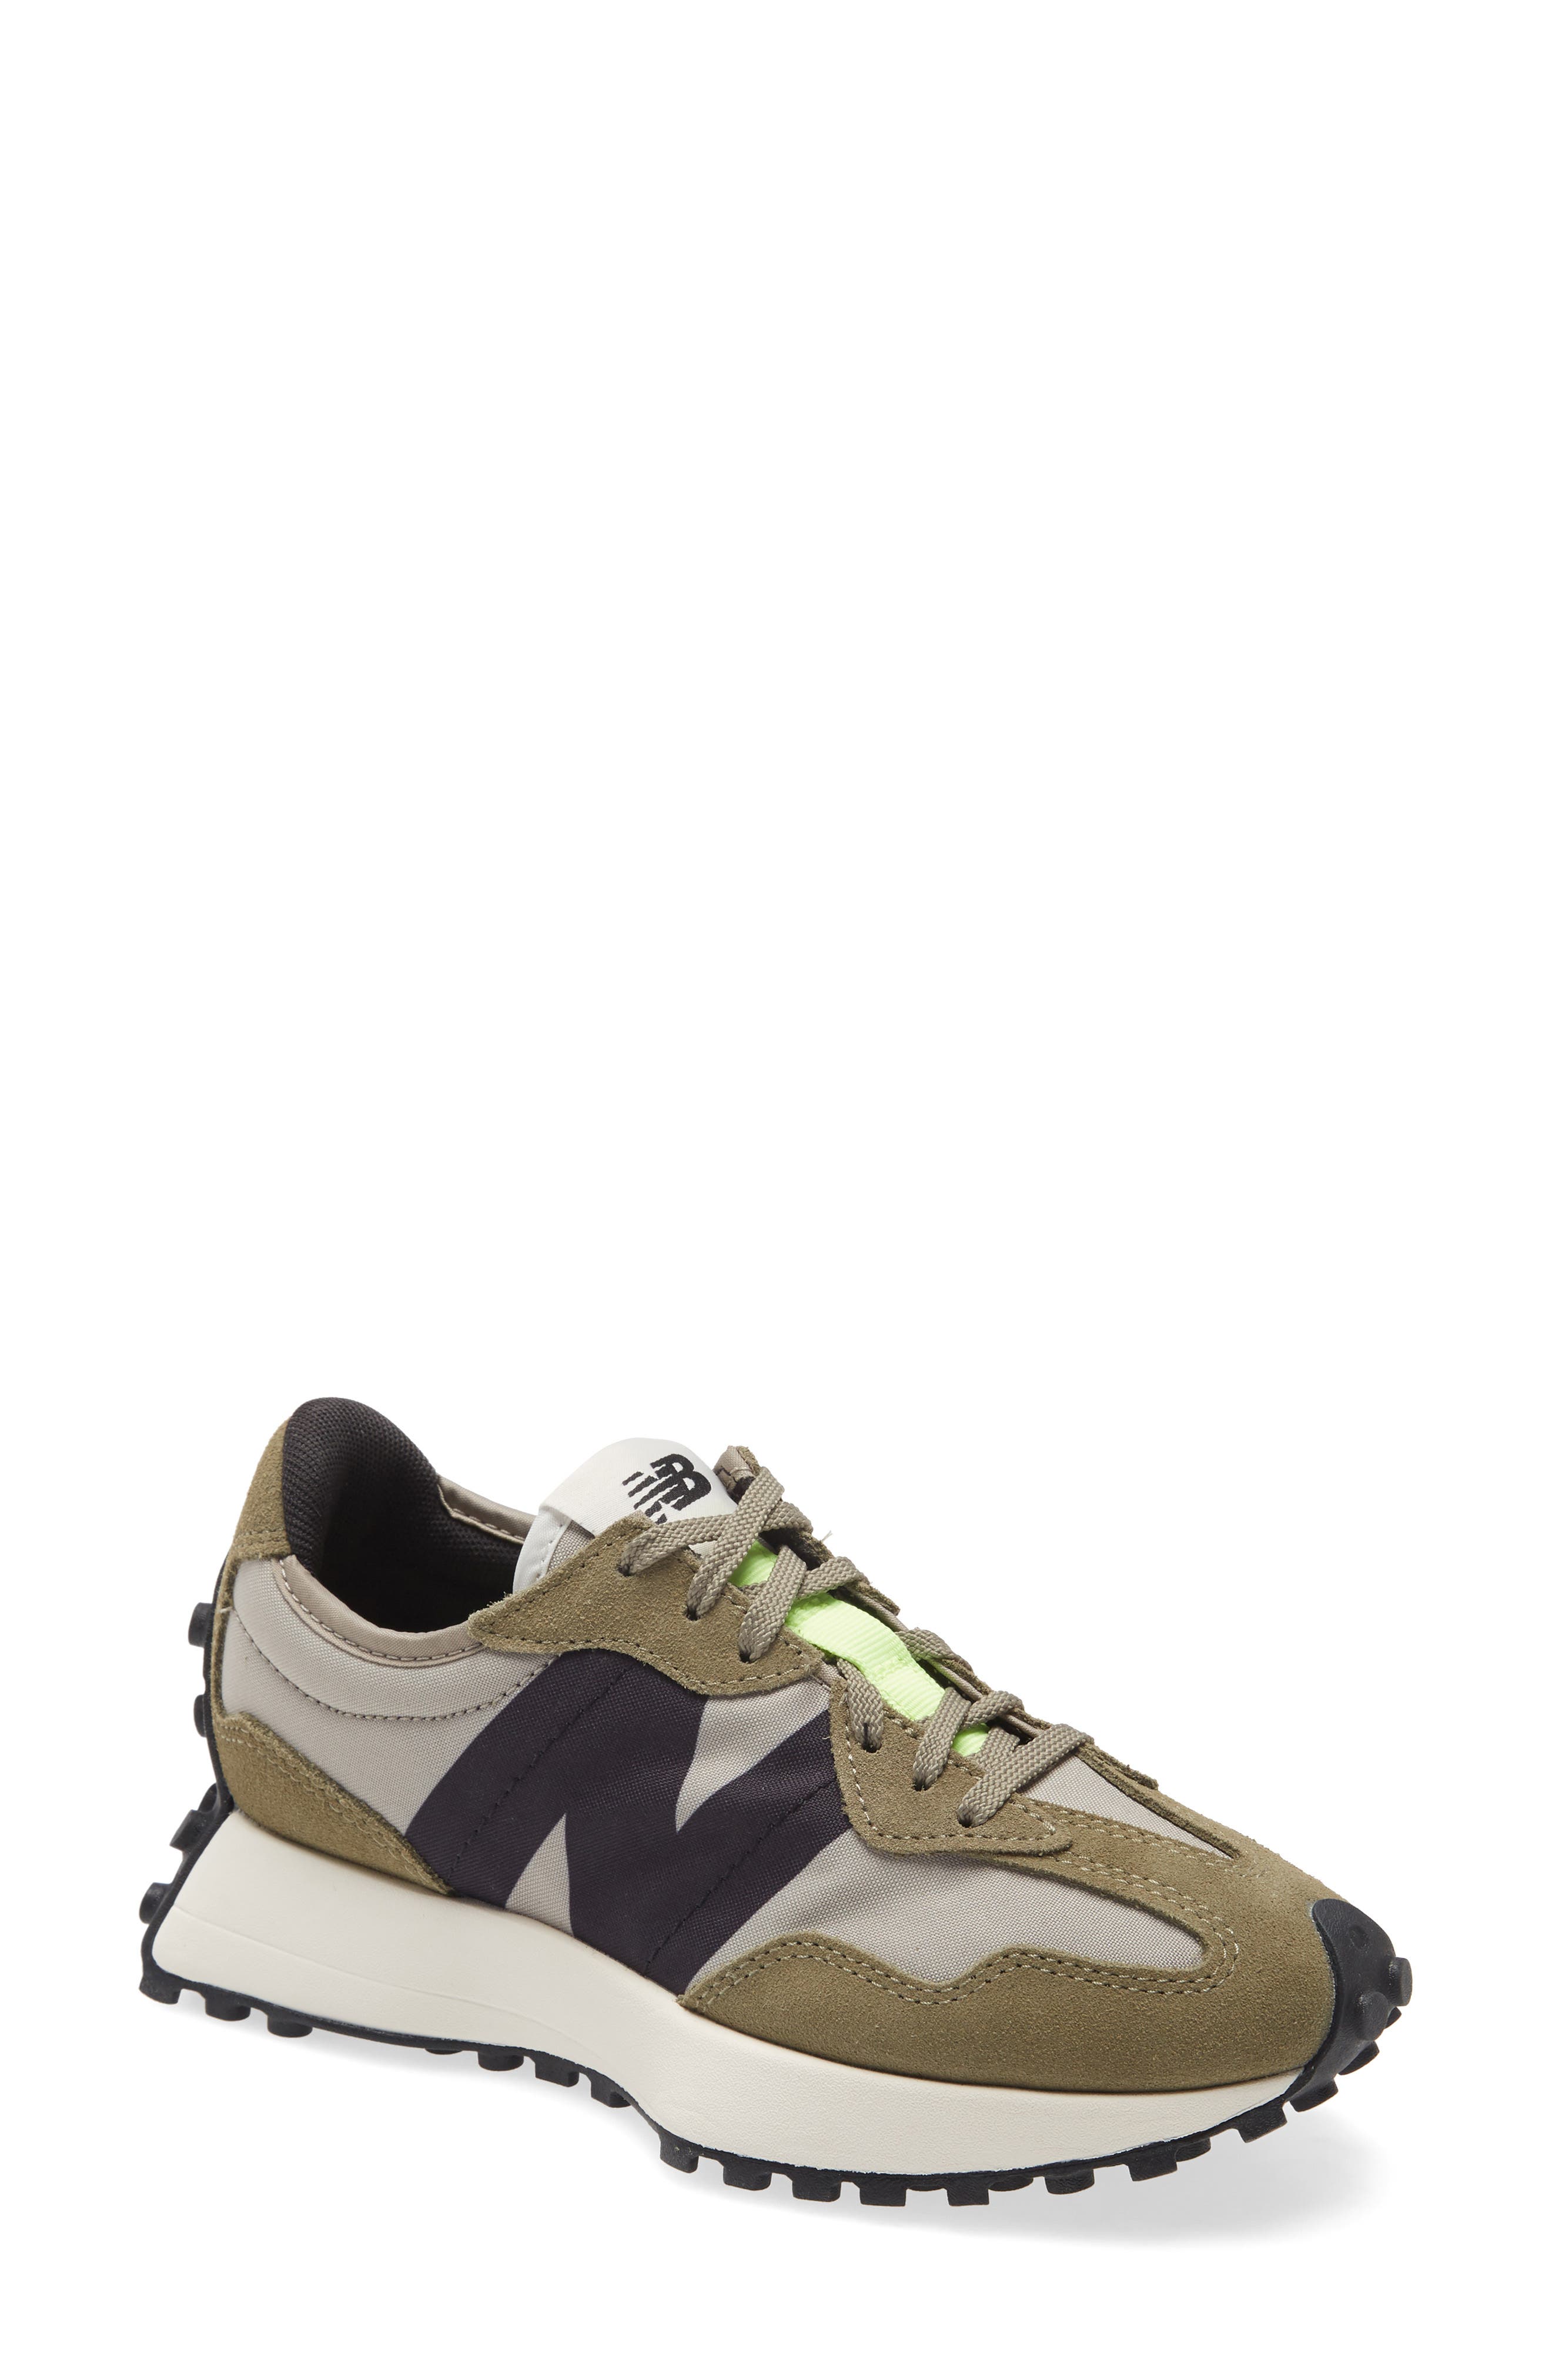 new balance shoes nordstrom